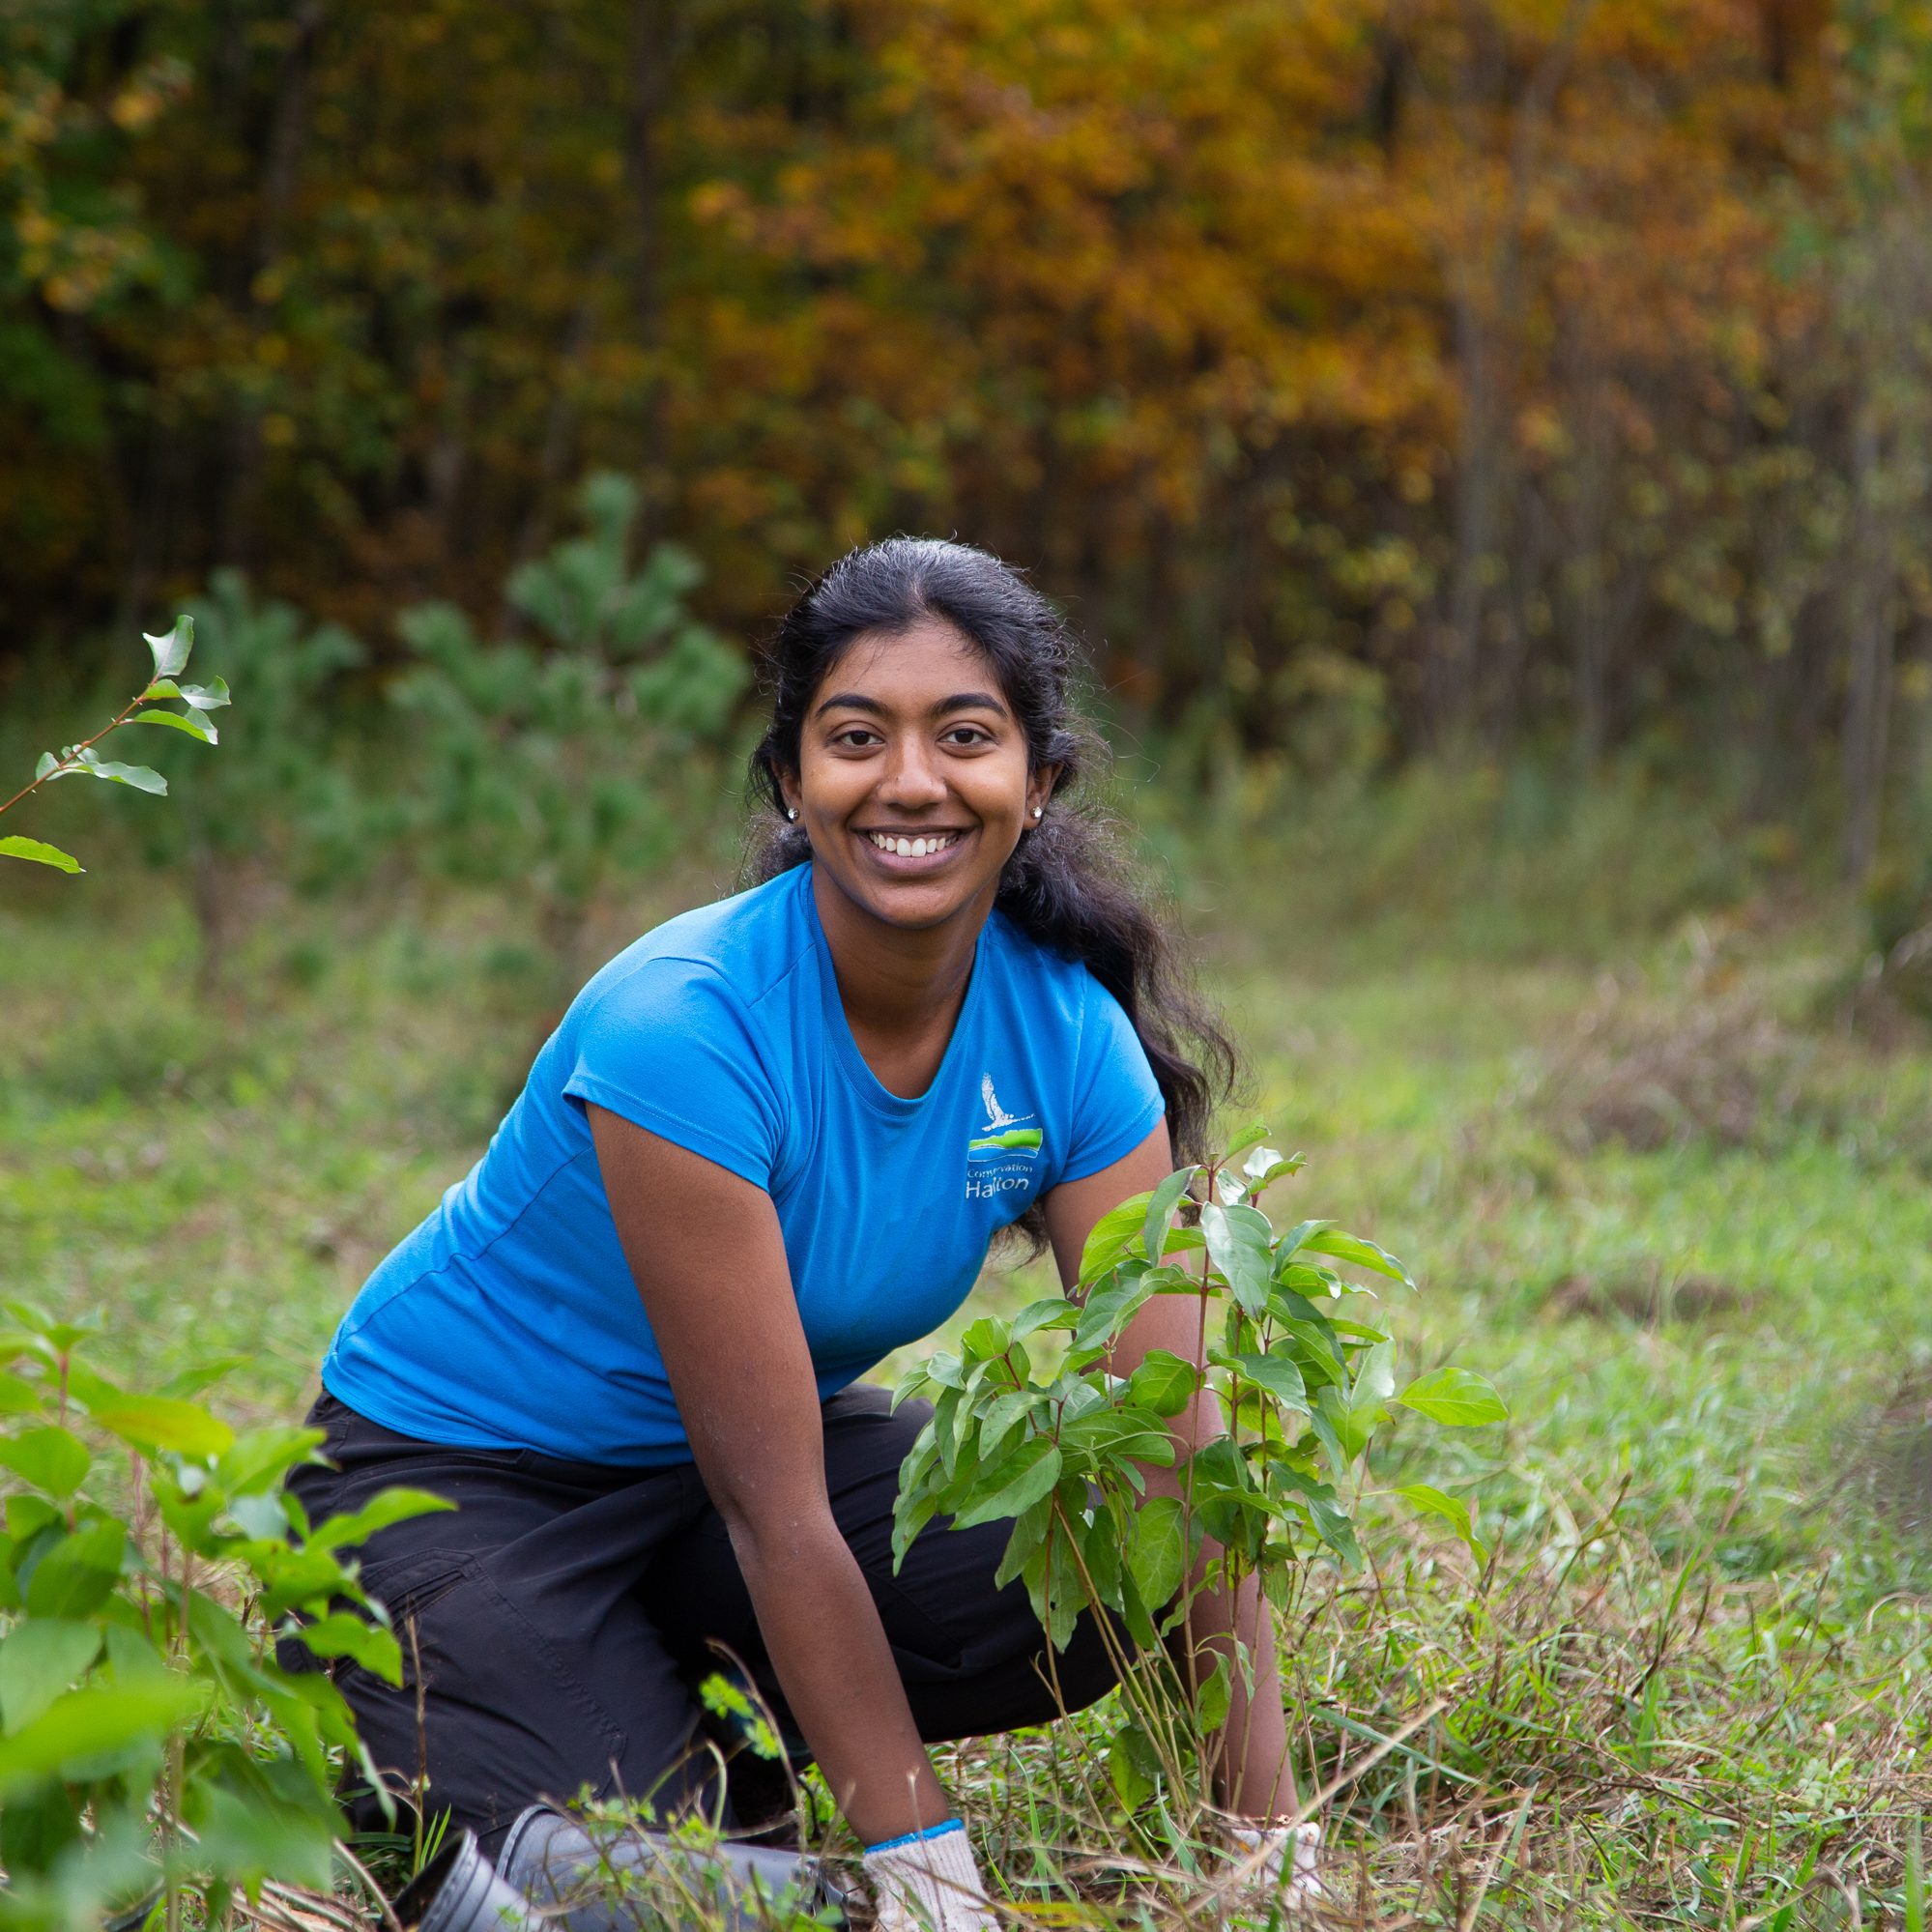 A woman smiles for the camera as she plants a tree